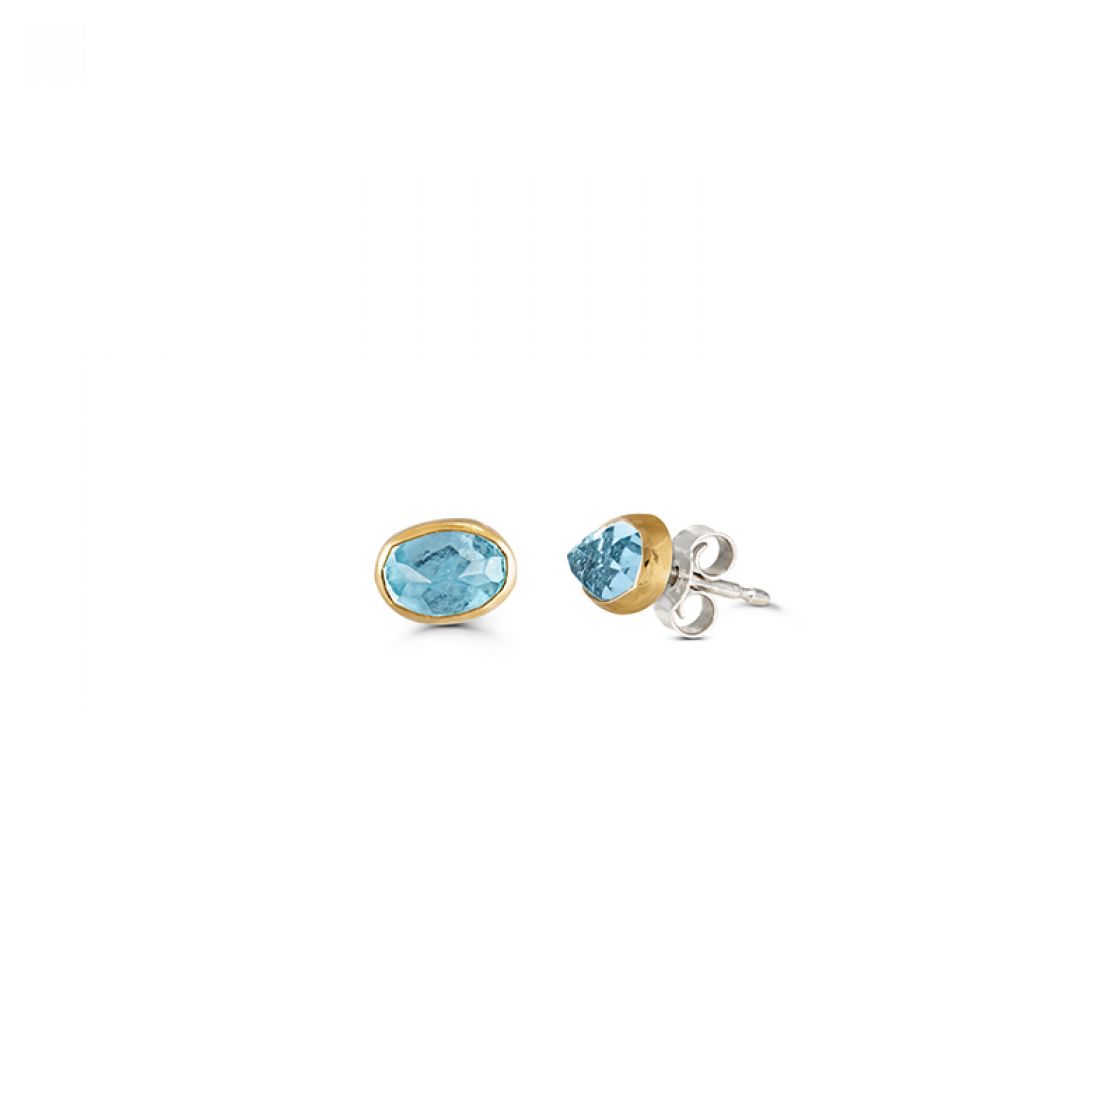 18kt gold bezels trace the shape of these beautiful oval aquamarine  stones with sterling silver backings